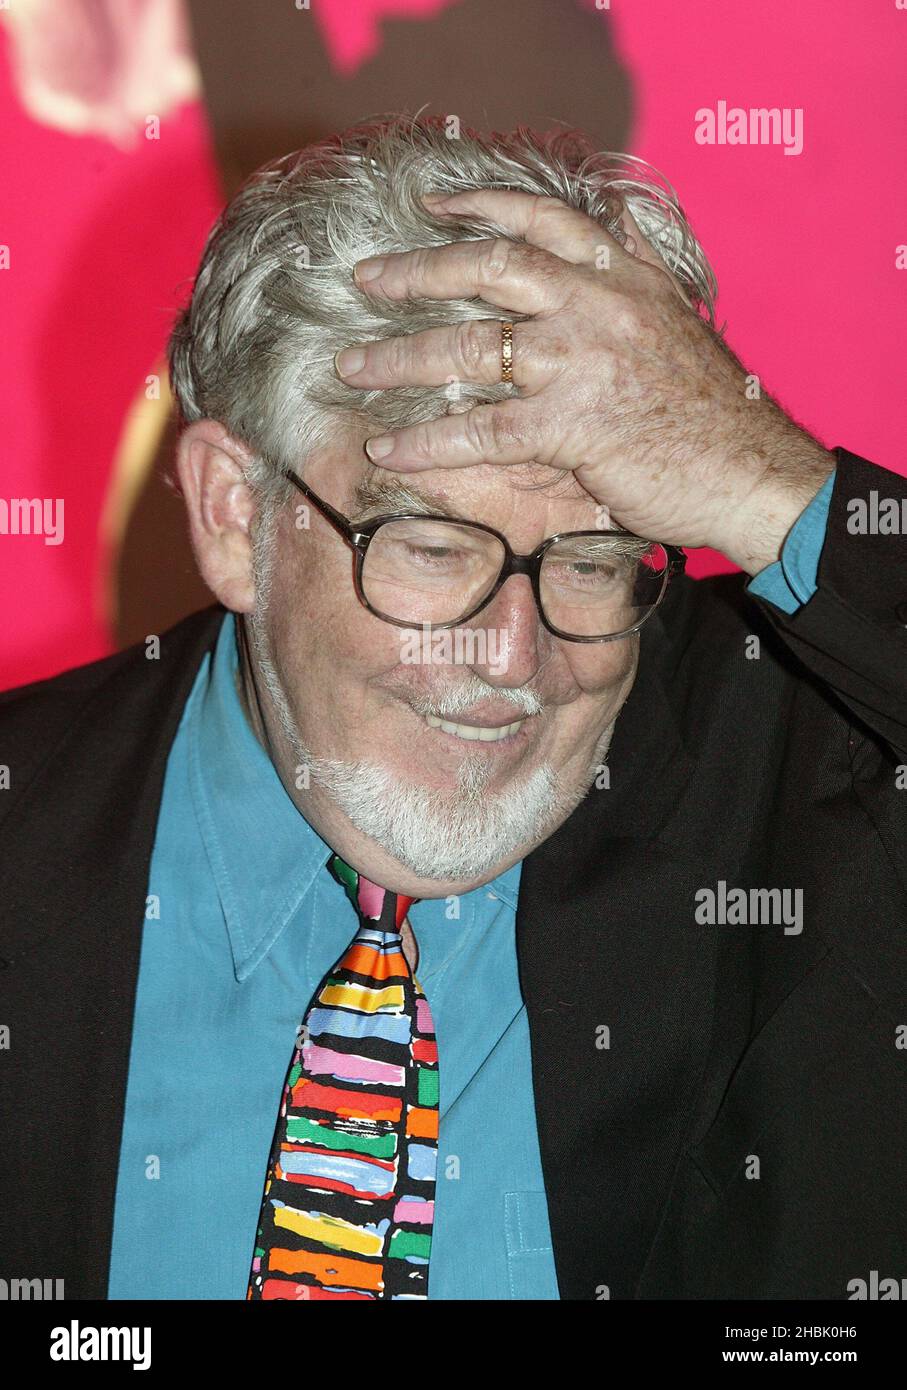 Rolf Harris arrives at the 'Dirty Dancing: The Classic Story On Stage' premiere at the Aldwych Theatre on October 24, 2006 in London. Stock Photo